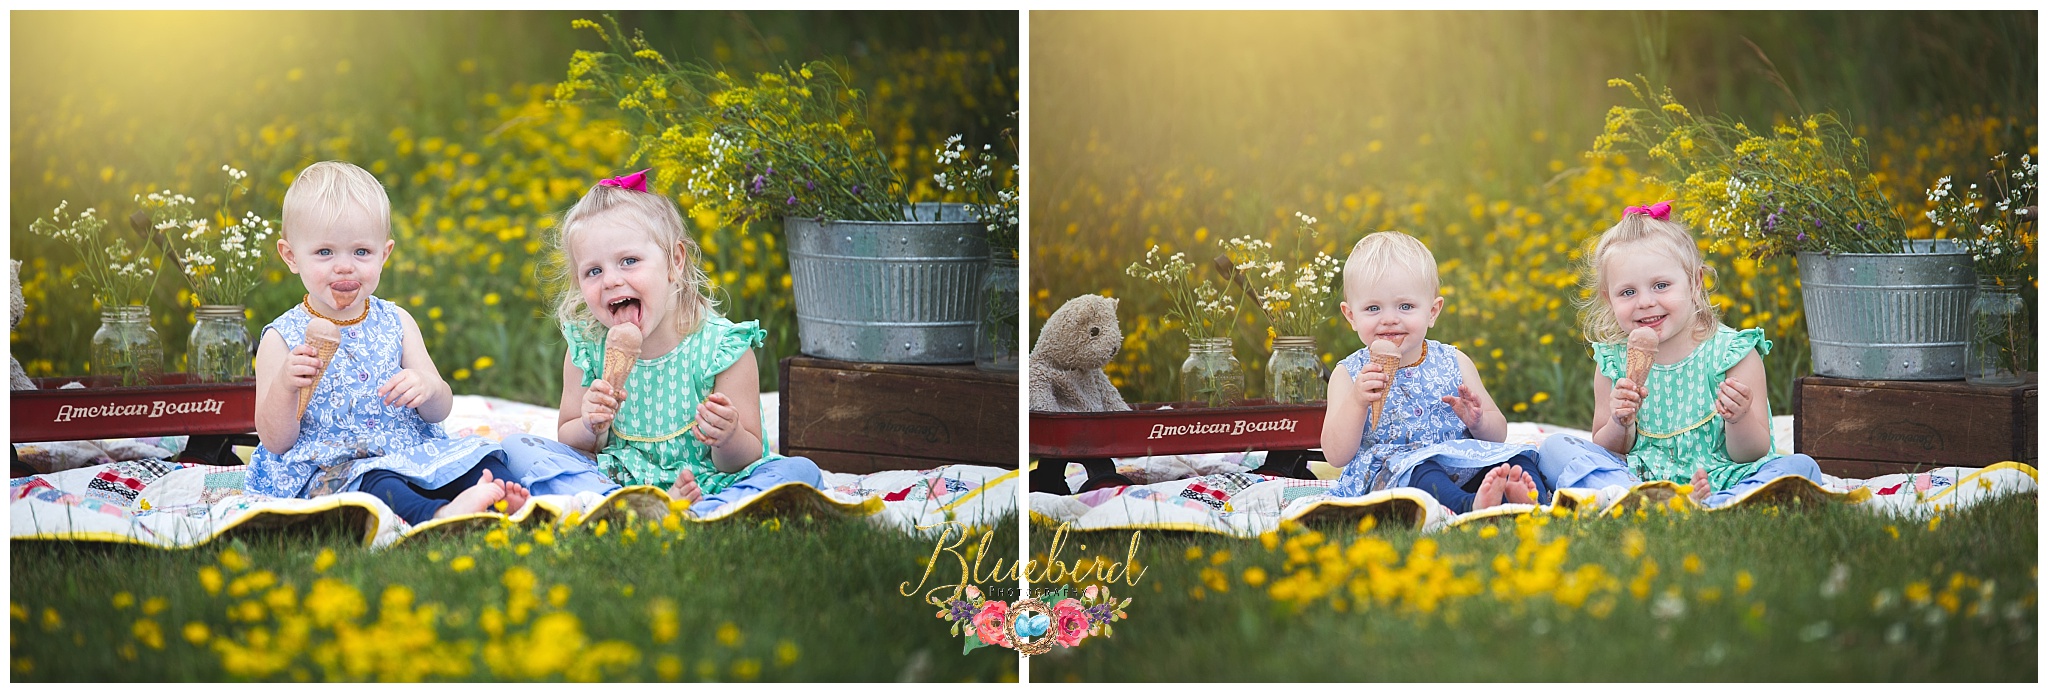 Summer Themed Mini Sessions in Fort Wayne